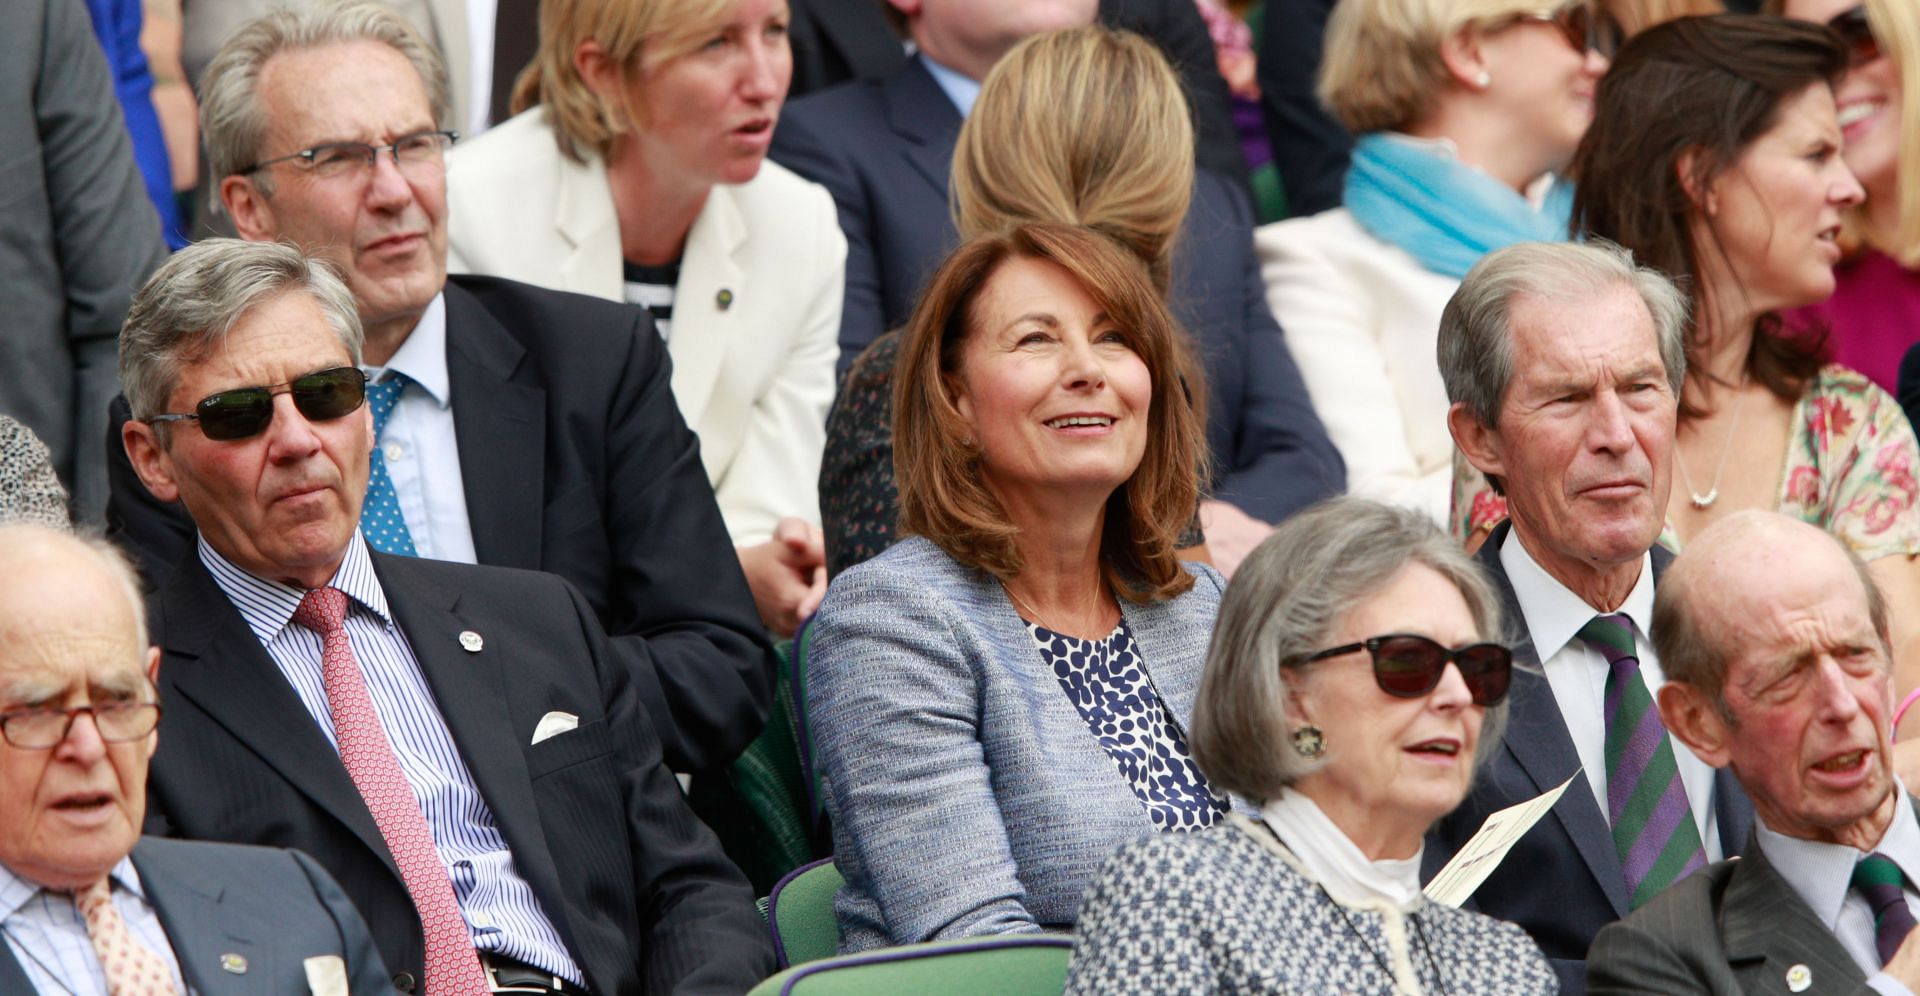 Parents of Kate Middleton, Michael and Carole Middleton during a tennis match